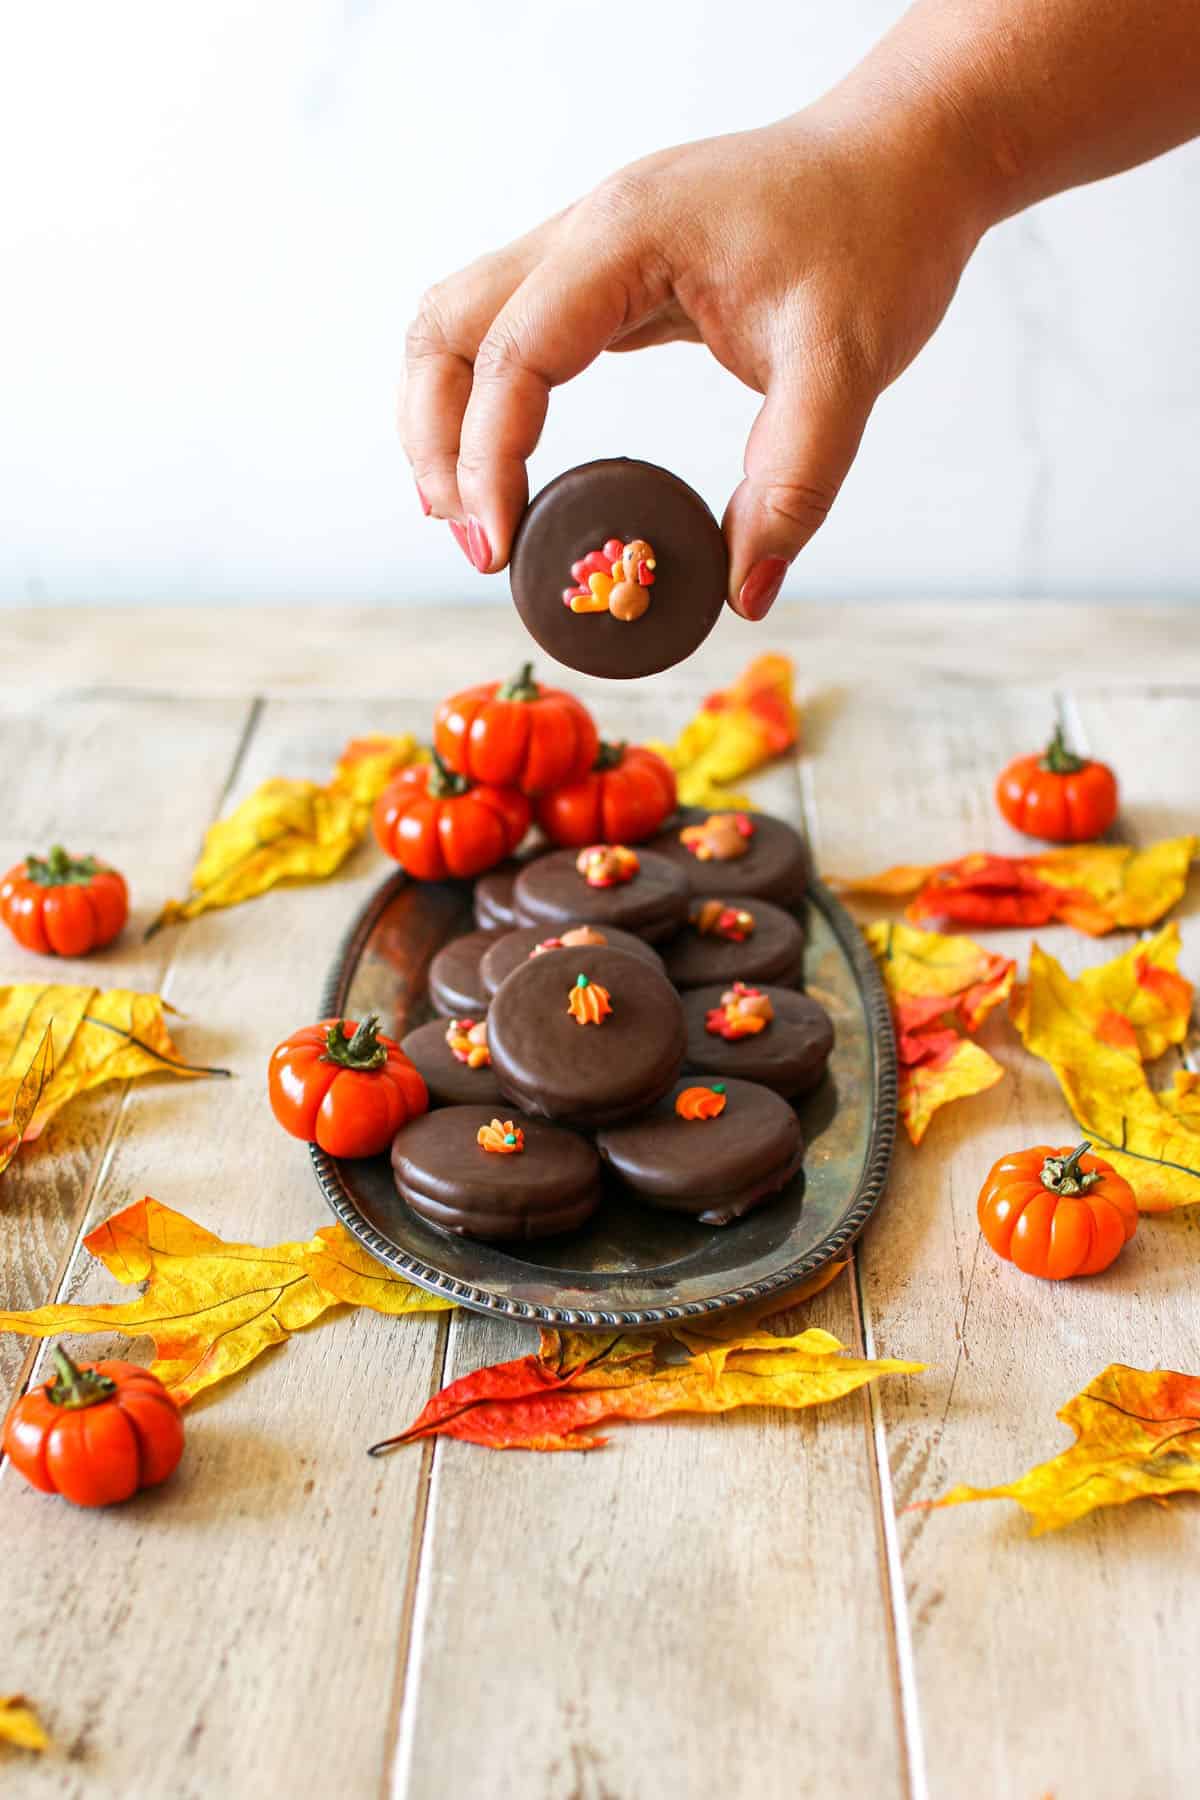 A small antique tray with Thanksgiving Chocolate Covered Oreos stacked on top surrounded by mini pumpkins and yellow/orange leaves on a wood plank surface with white marble in the background. A tan hand picks up an oreo with a decorated turkey on top.